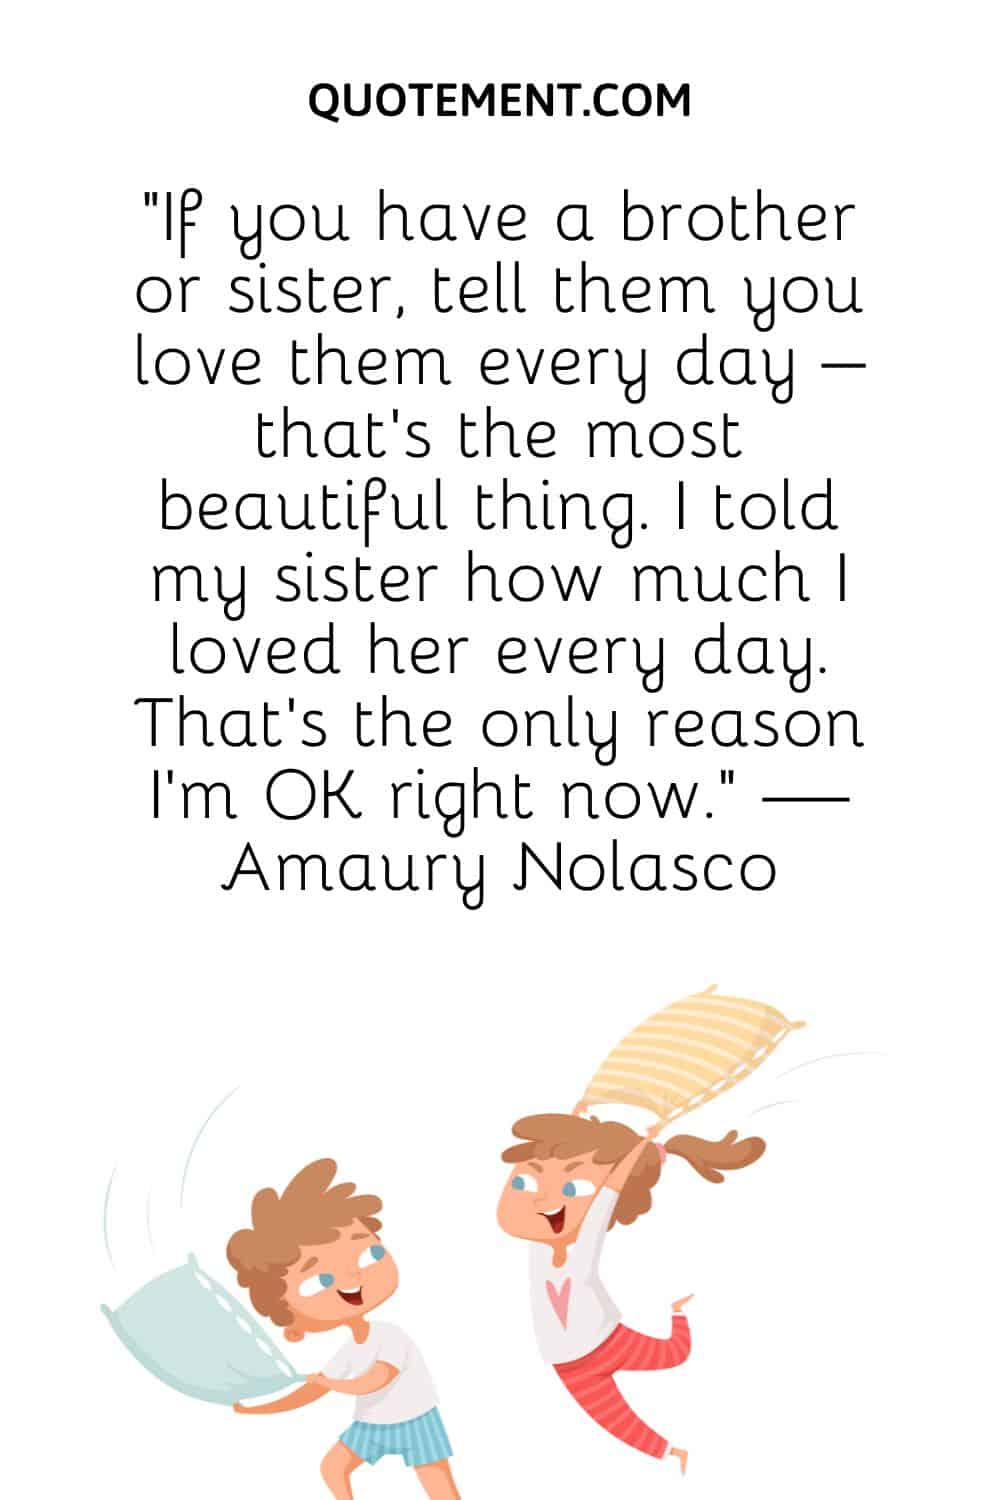 If you have a brother or sister, tell them you love them every day – that’s the most beautiful thing.